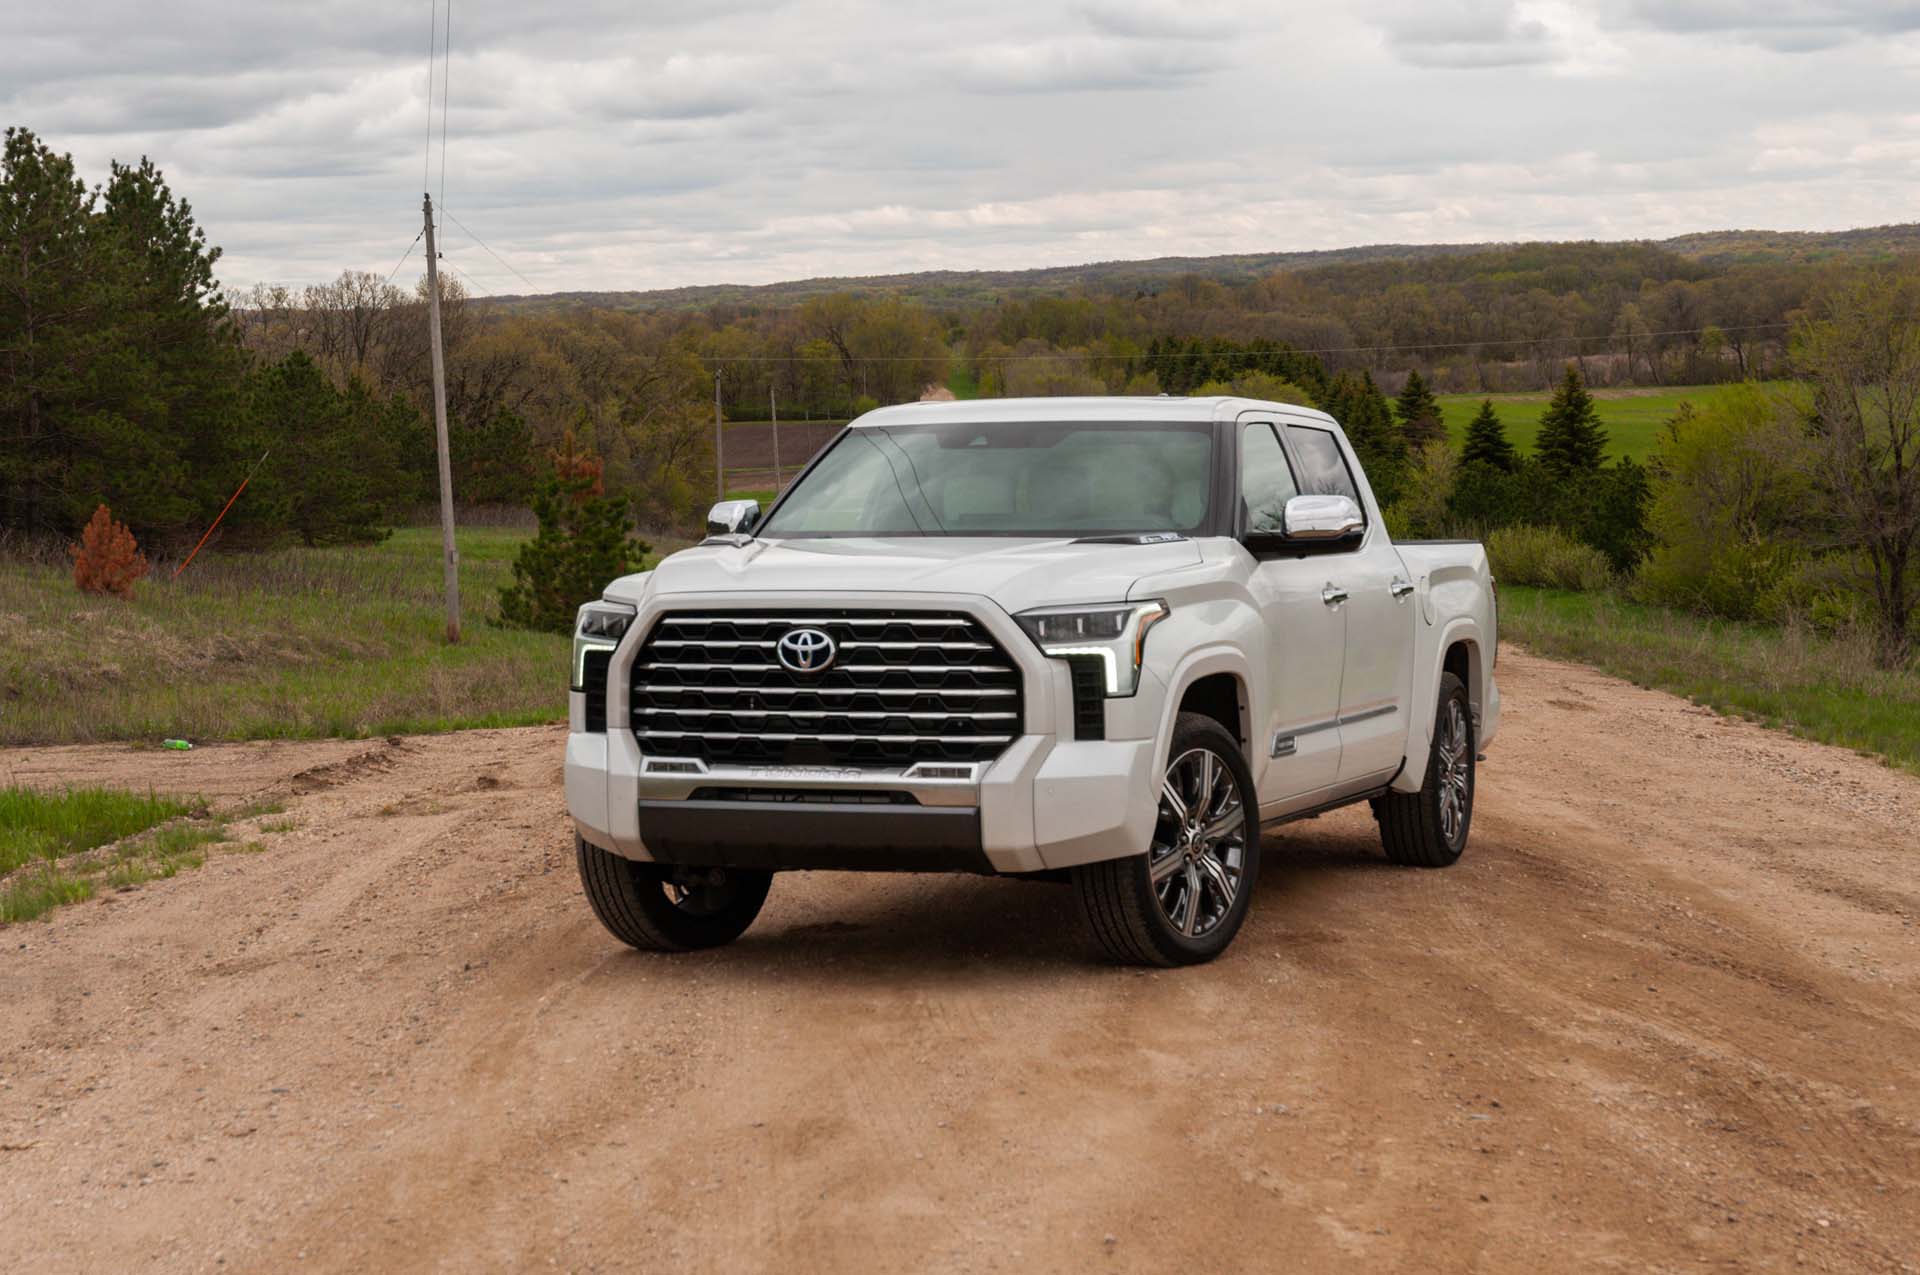 Review The 2022 Toyota Tundra Capstone plays follow the leader